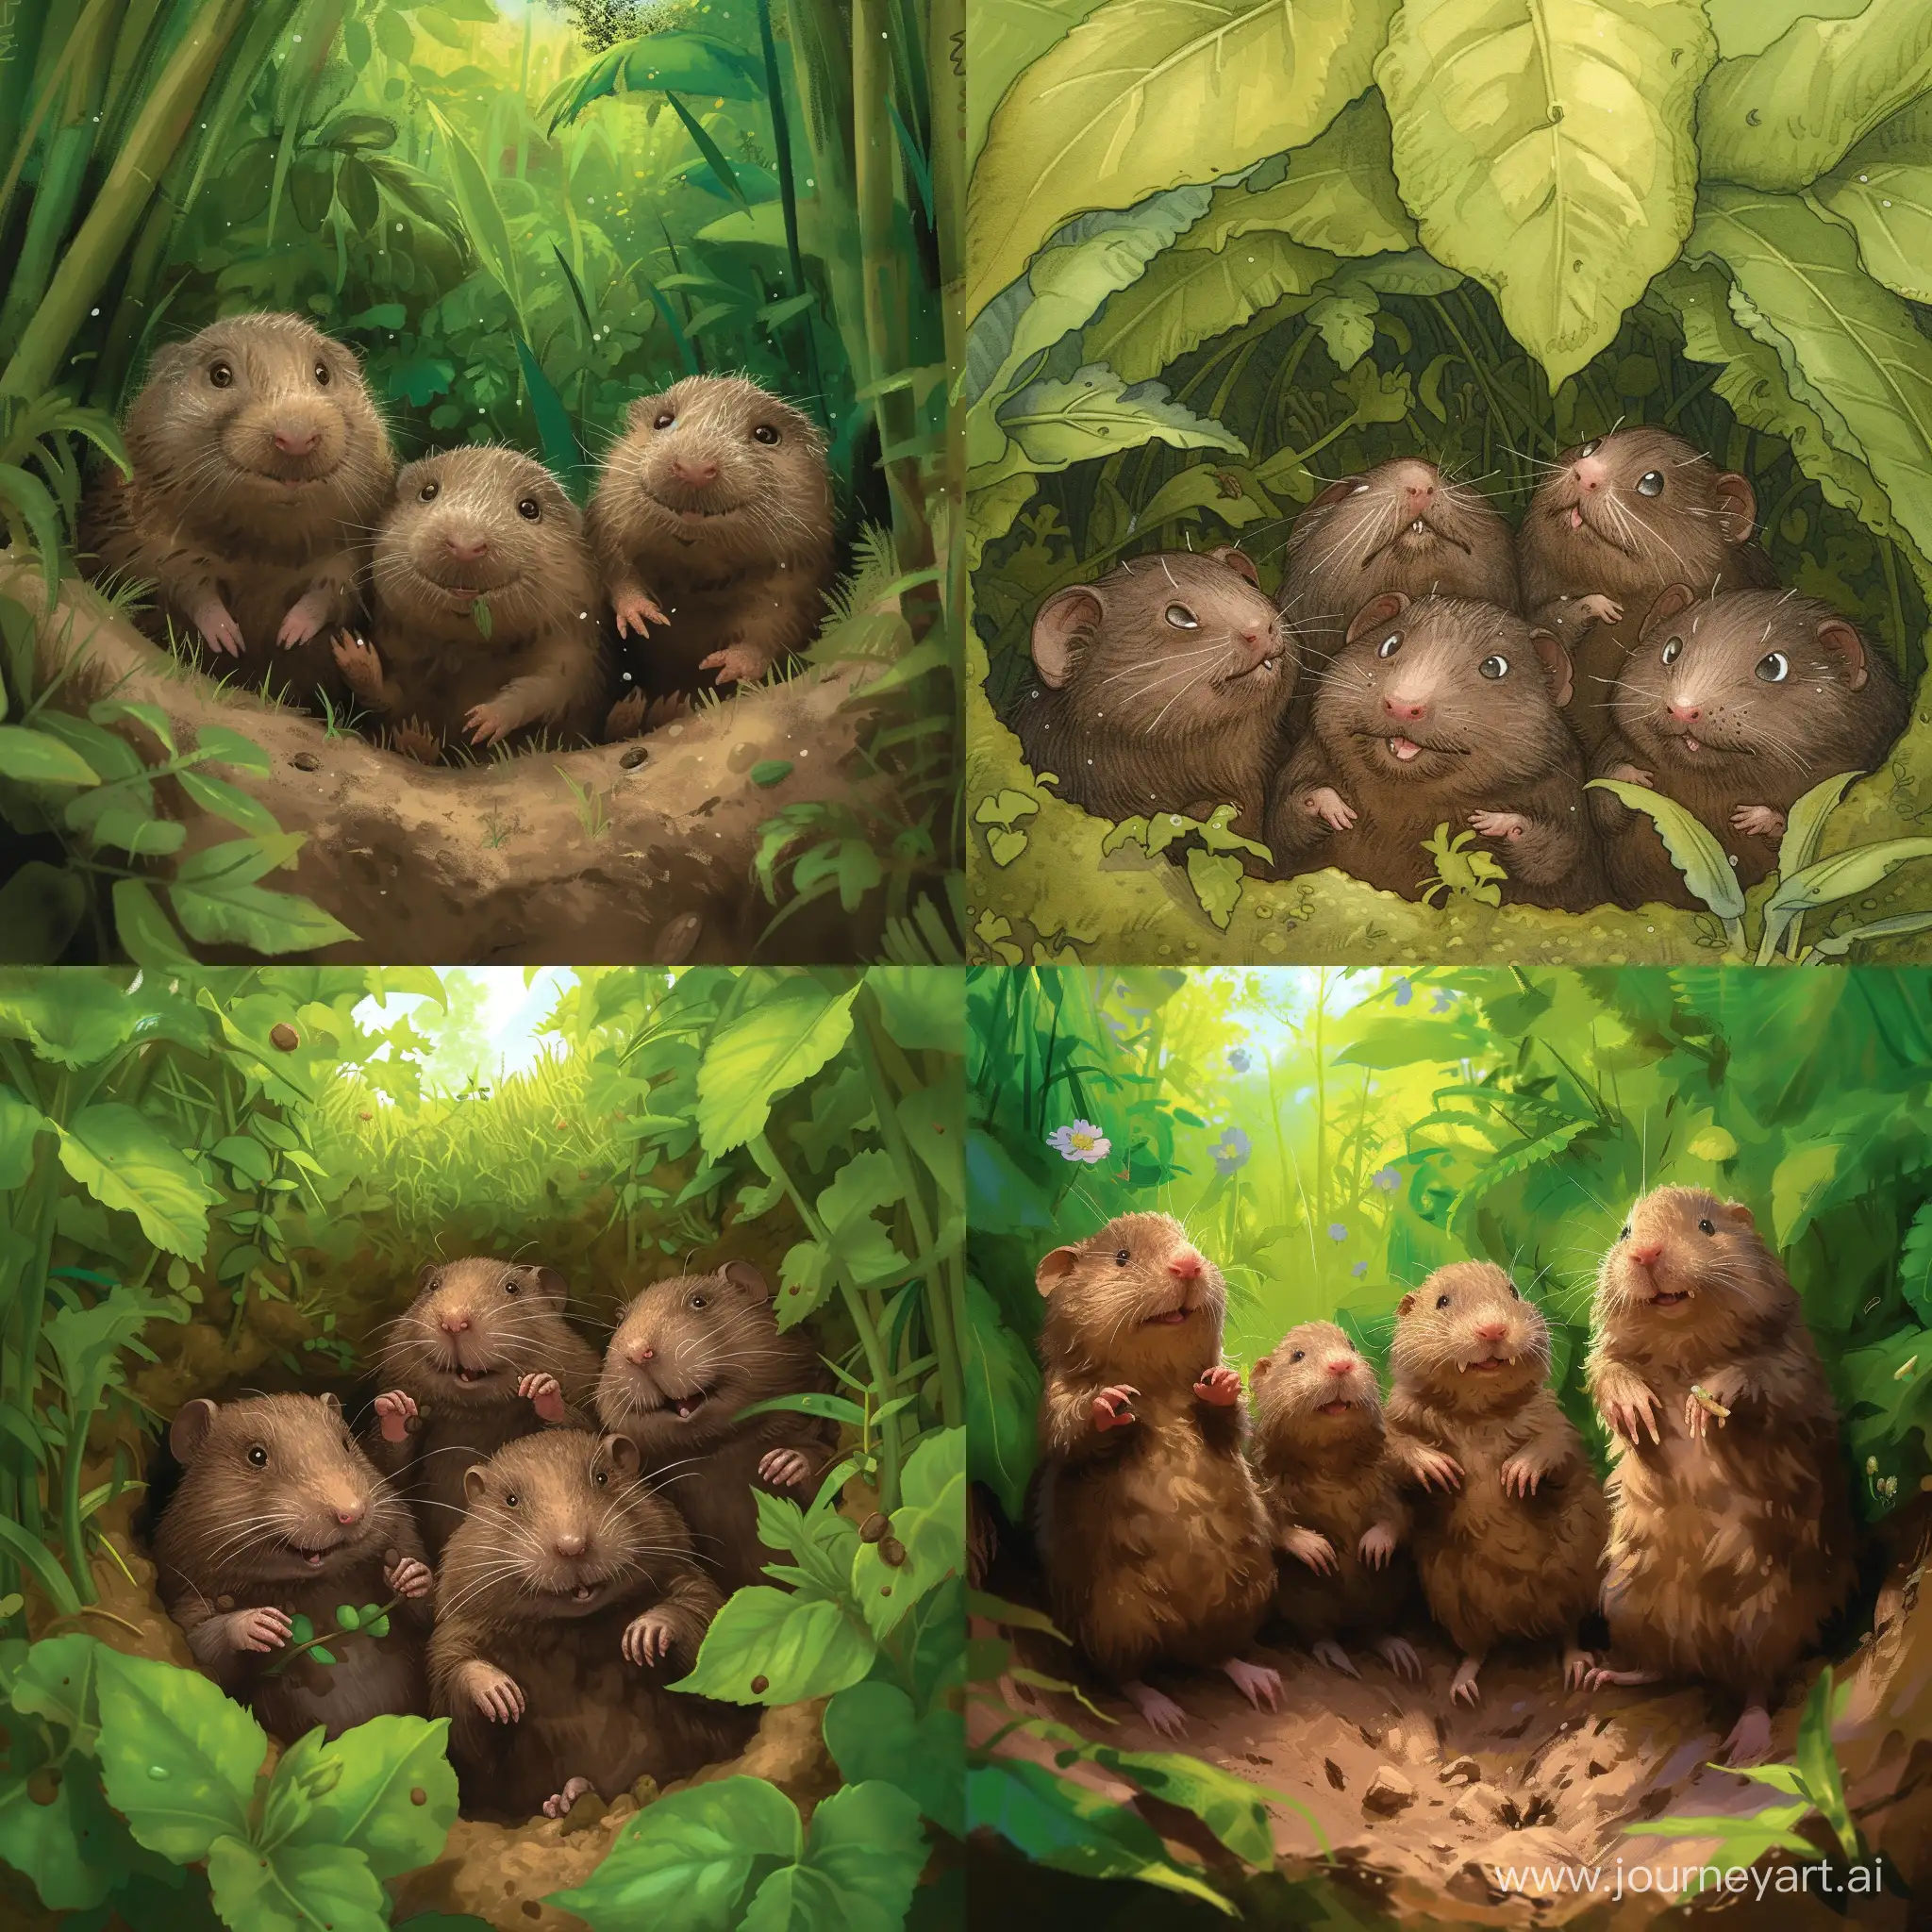 Once upon a time, in the heart of a lush, green forest, there lived four curious moles who loved to explore their underground world.